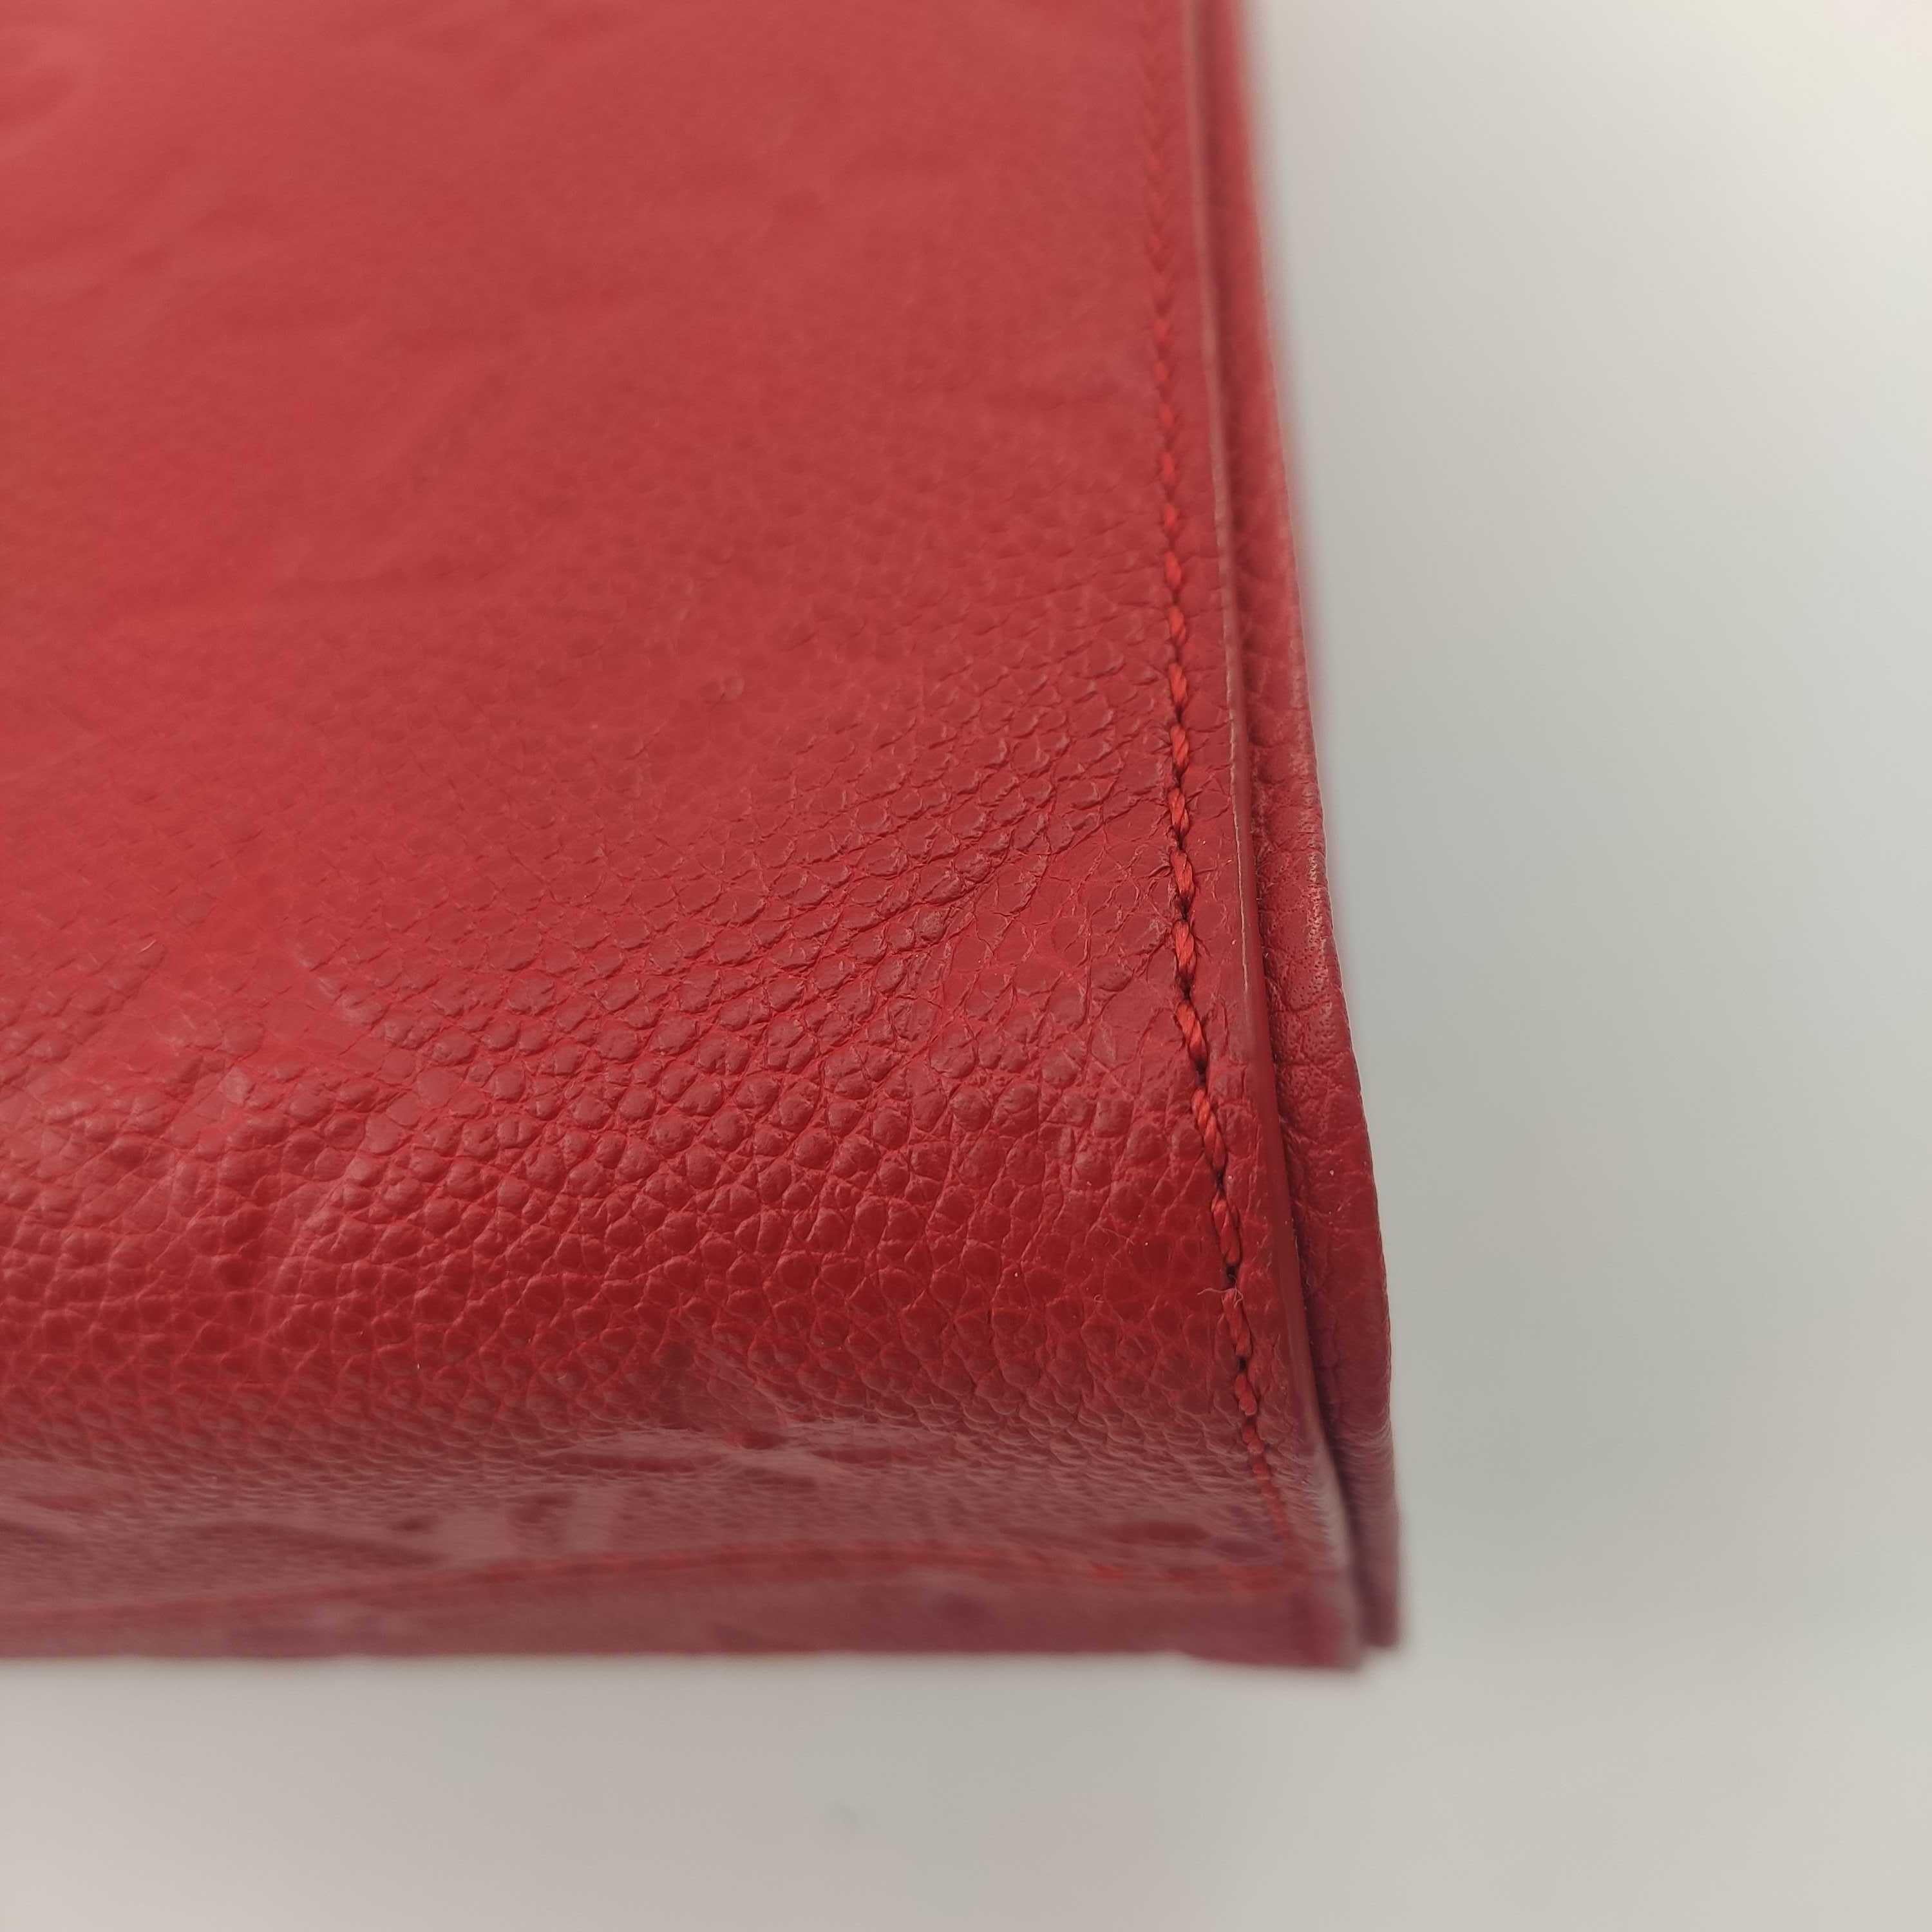 LOUIS VUITTON Saint Sulpice Shoulder bag in Red Leather 6